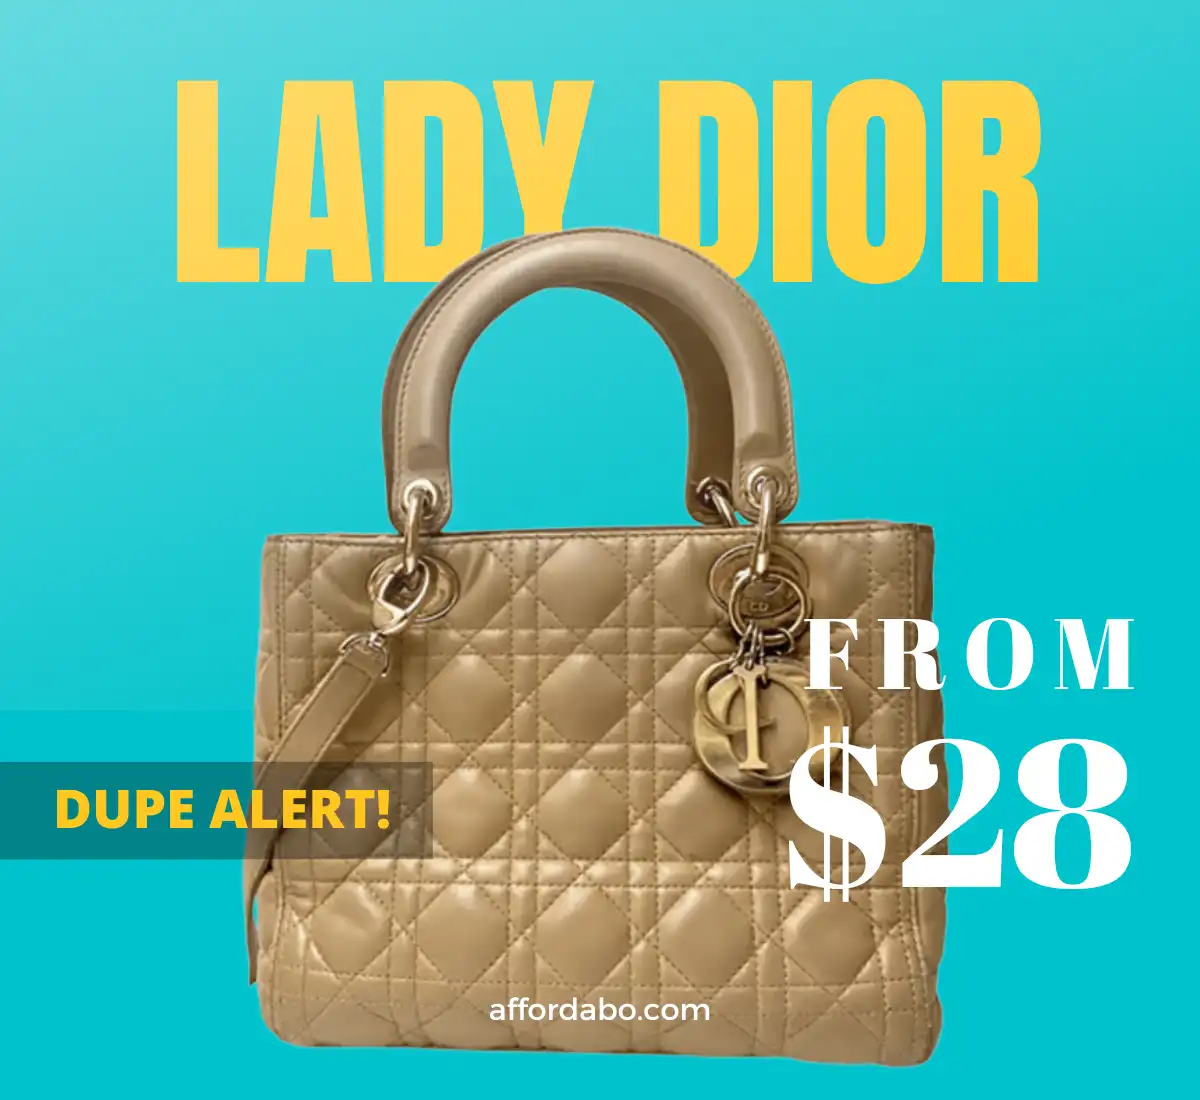 The best lady dior bag dupes (starting at $28)